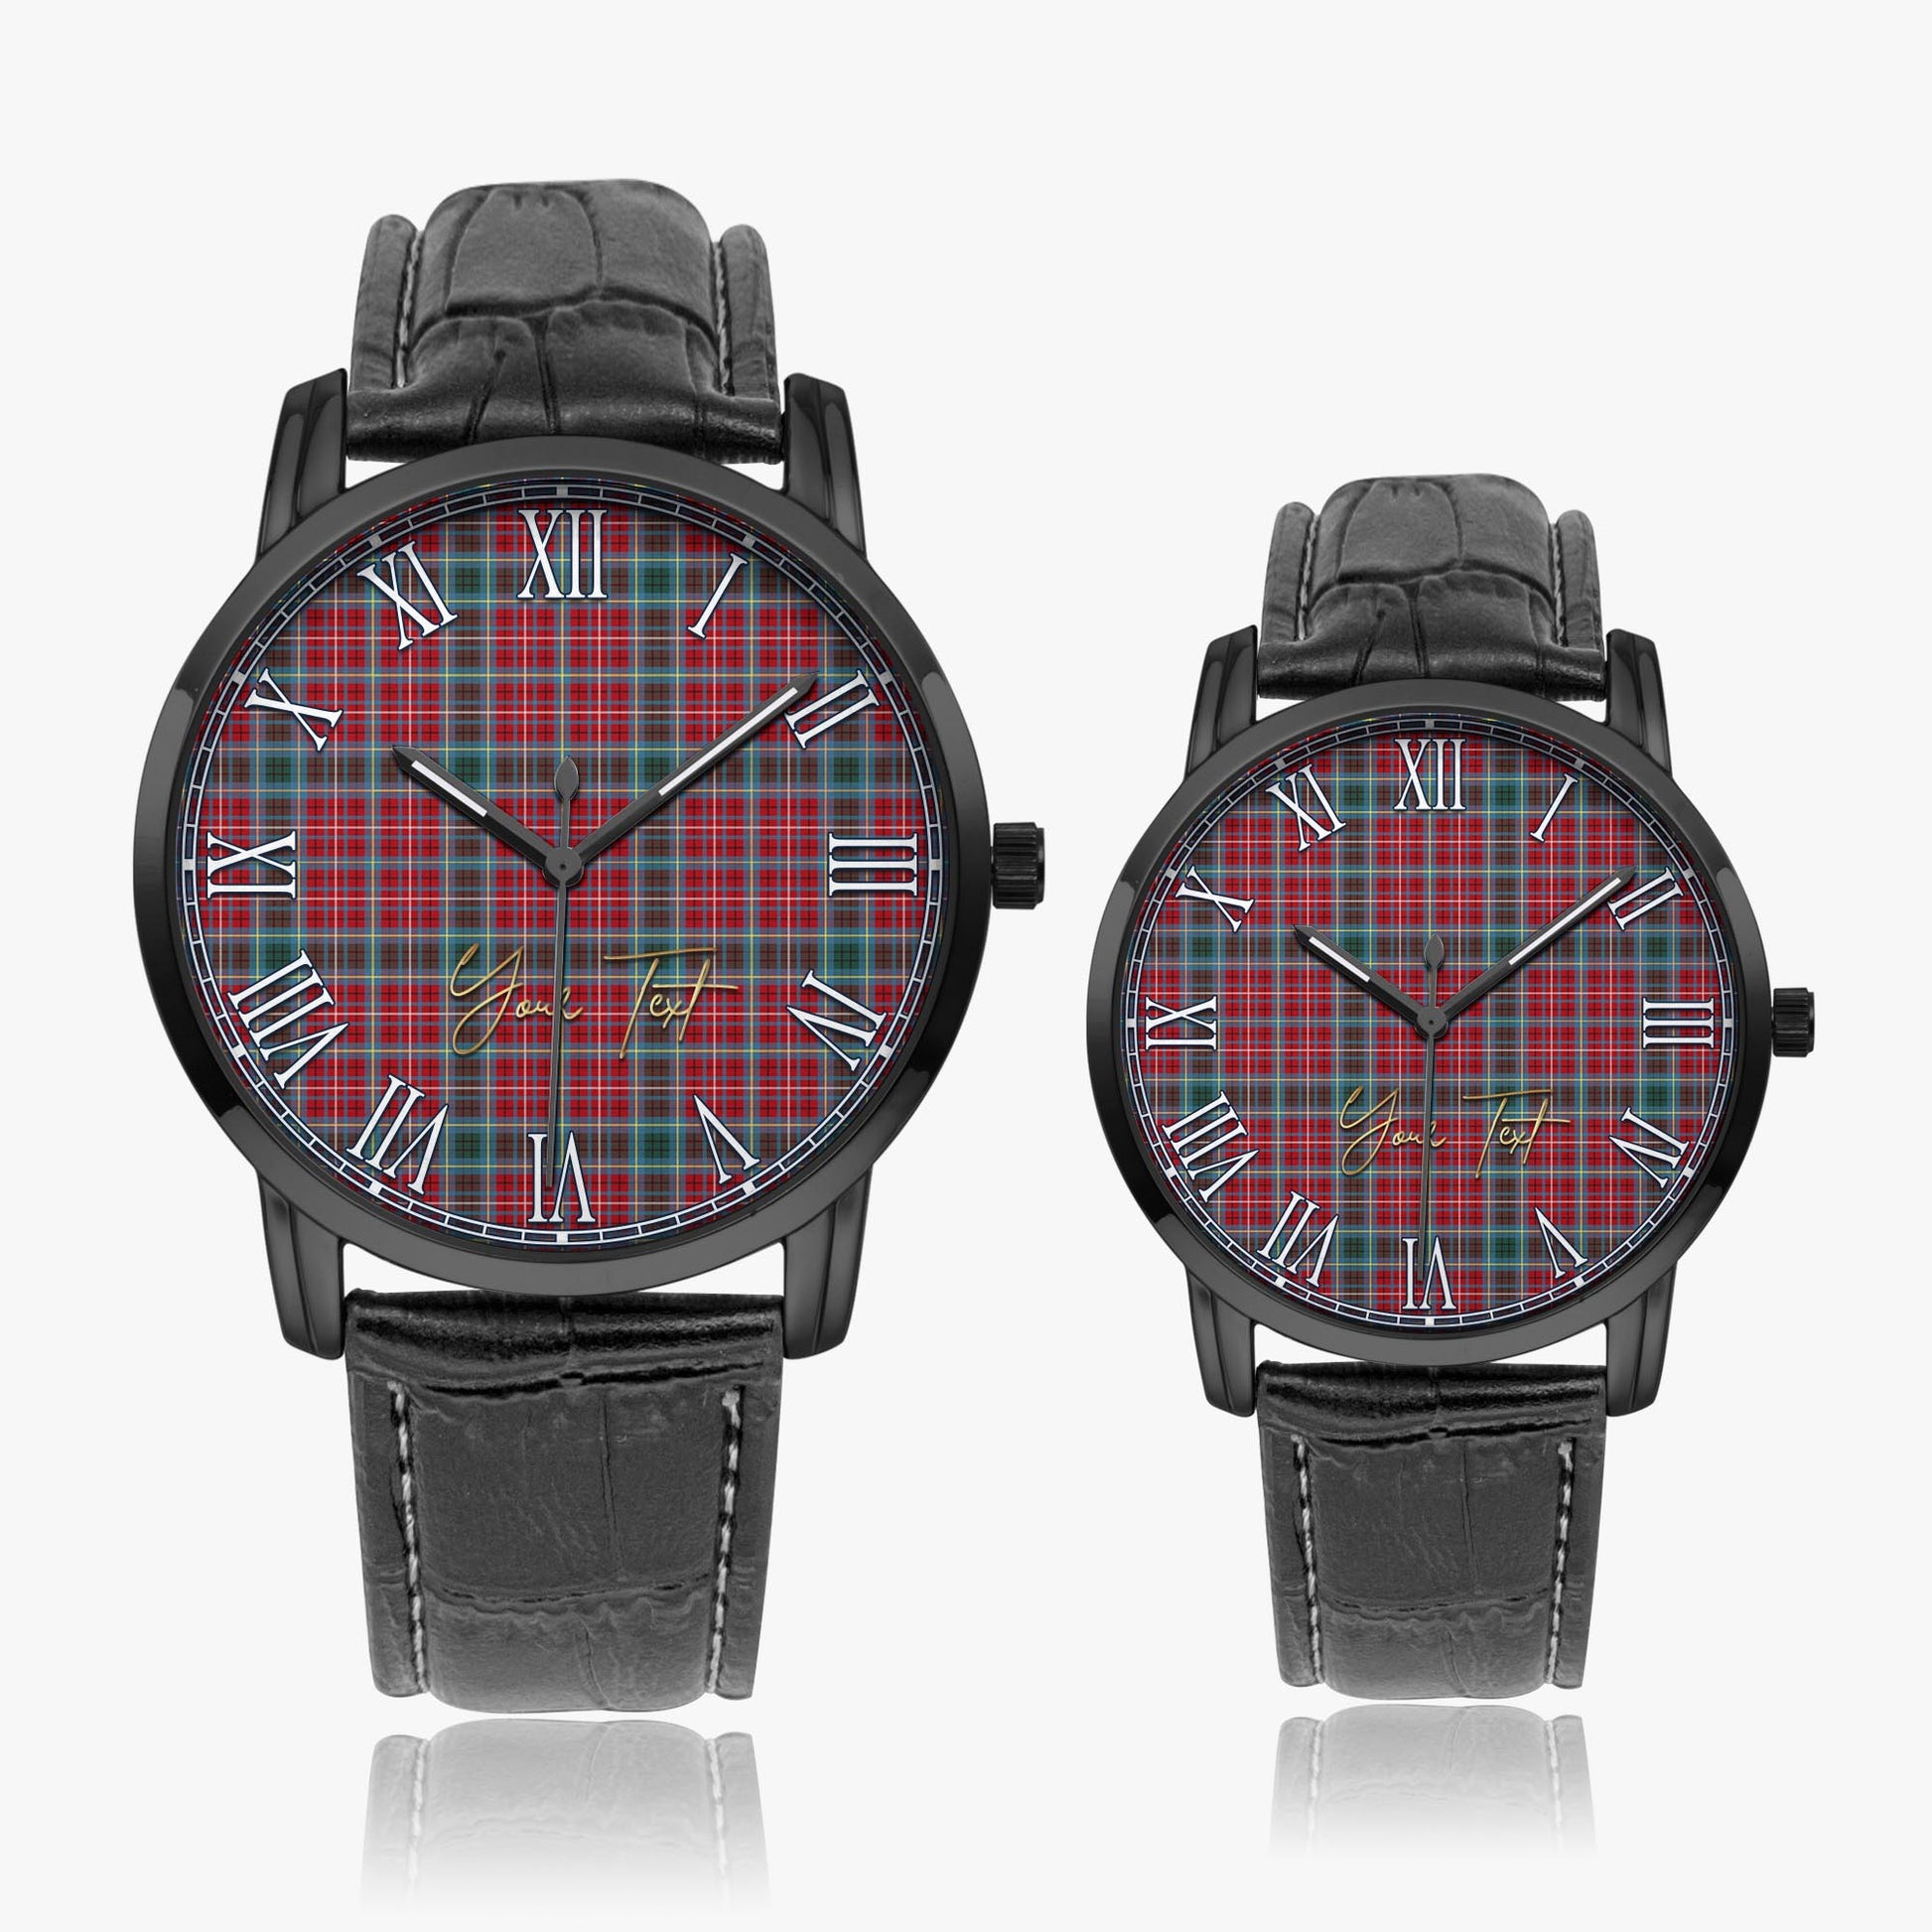 British Columbia Province Canada Tartan Personalized Your Text Leather Trap Quartz Watch Wide Type Black Case With Black Leather Strap - Tartanvibesclothing